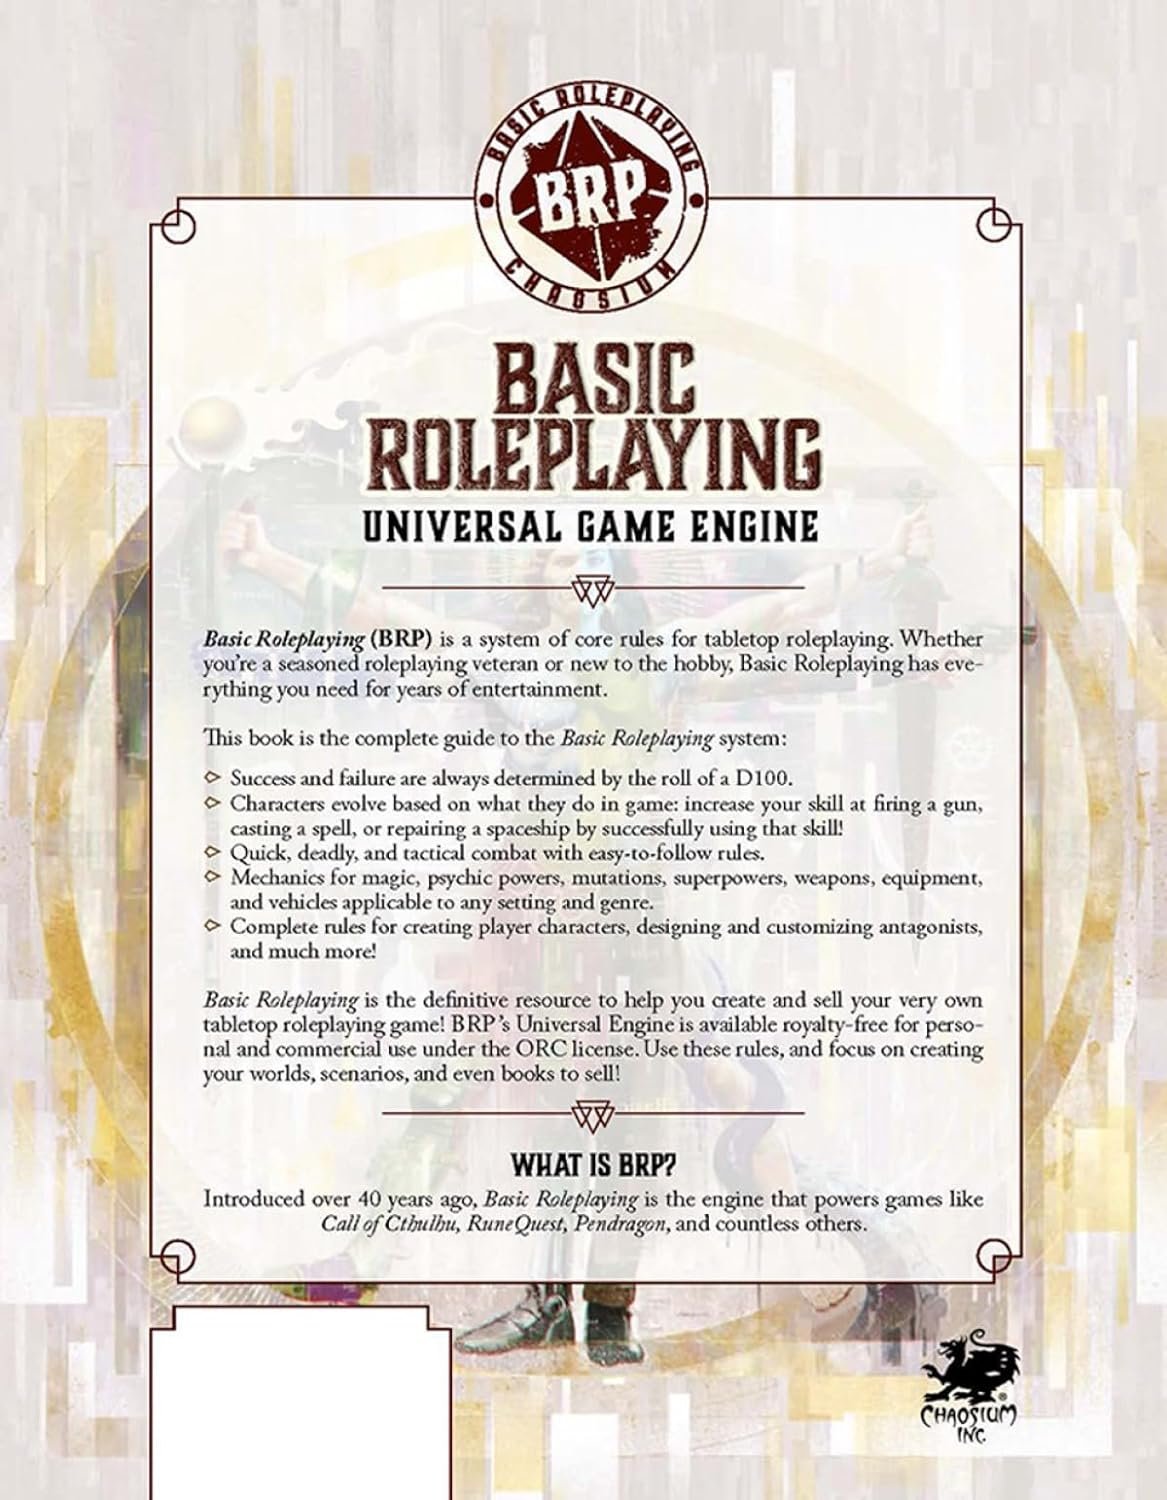 Basic Roleplaying: Universal Game Engine Review